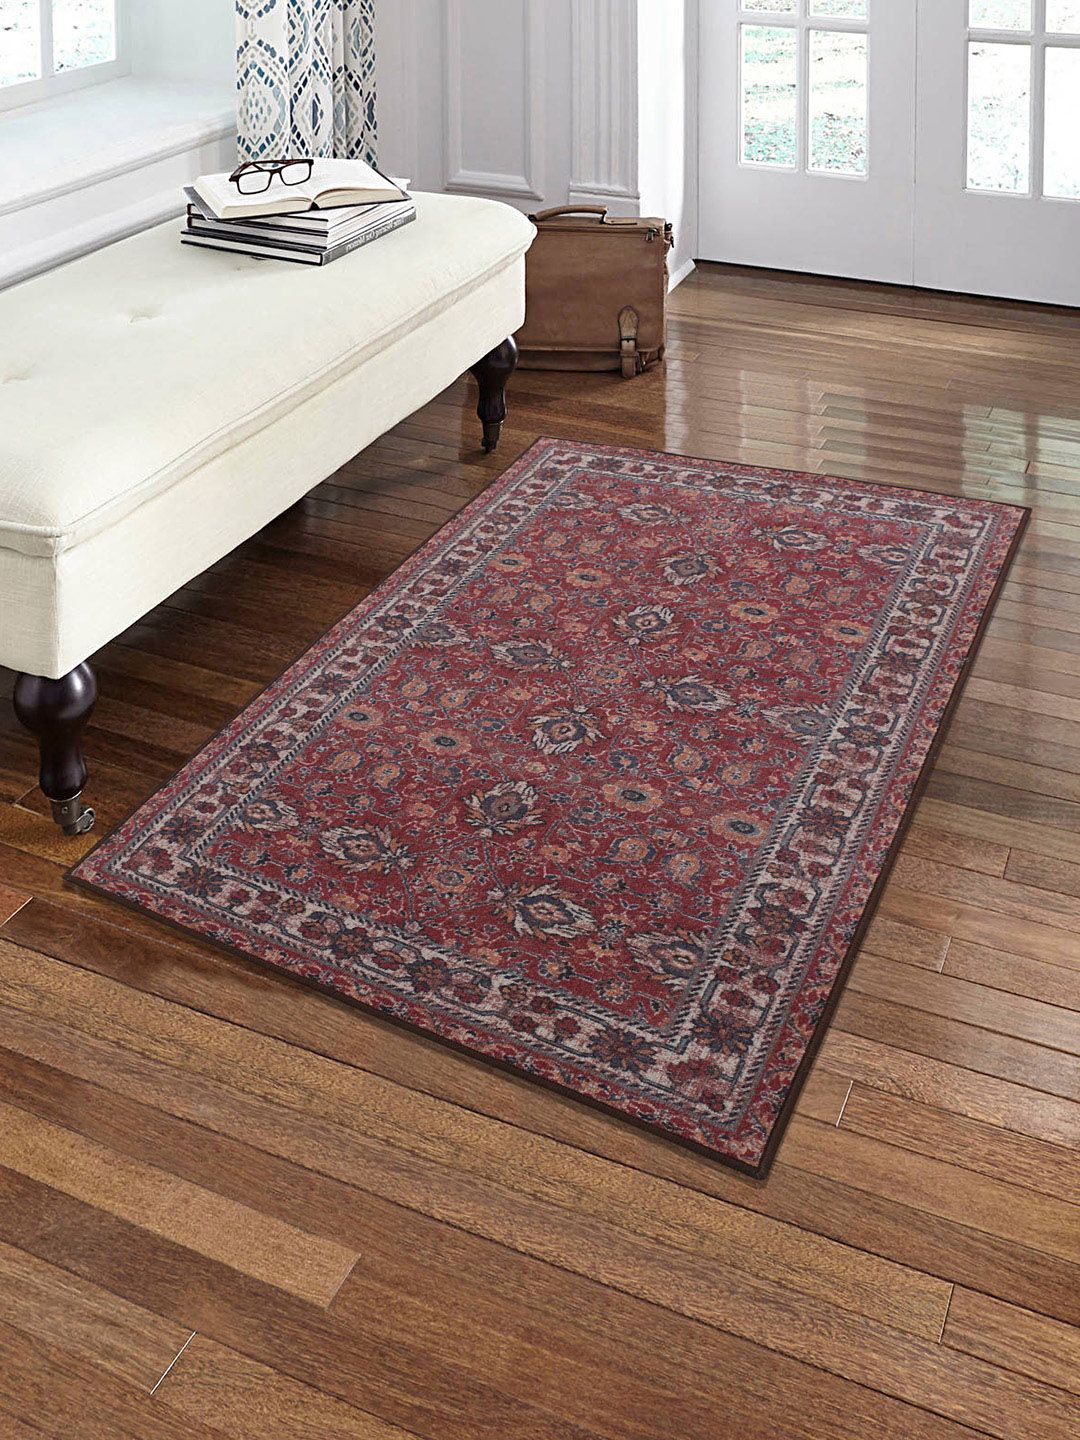 RUGSMITH Red & Beige Patterned Anti-Skid Carpet Price in India